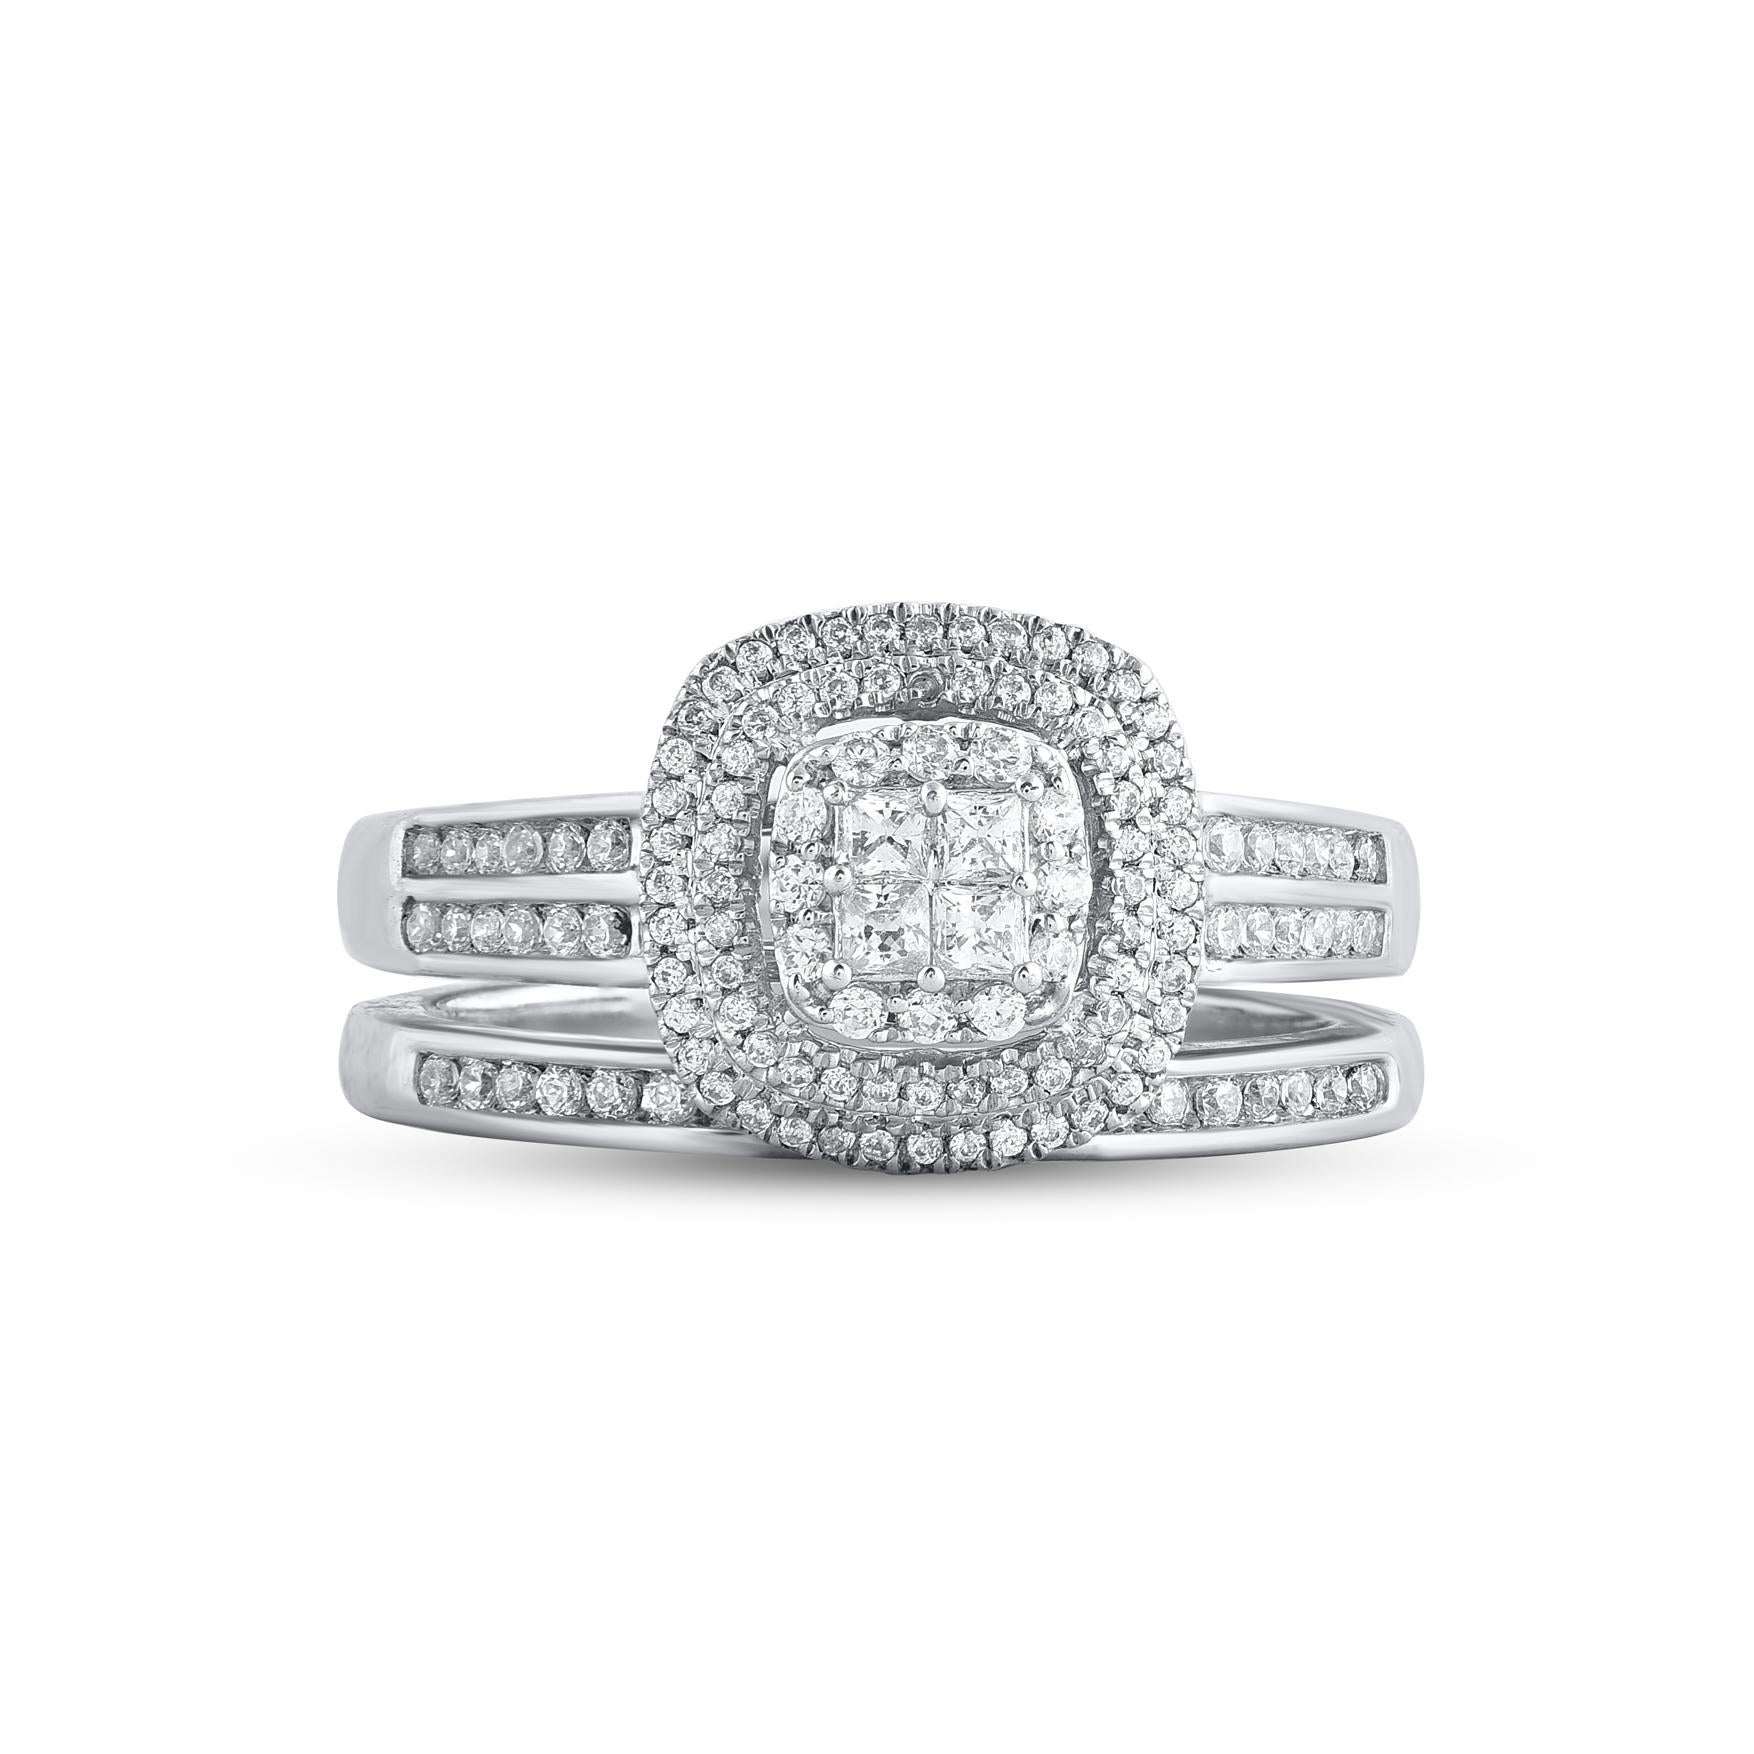 On that special day, express all your love with this elegant and dazzling diamond bridal set. Crafted in 14 Karat white gold. This wedding ring features a sparkling 131 brilliant cut, single cut round diamond and princess cut diamonds beautifully